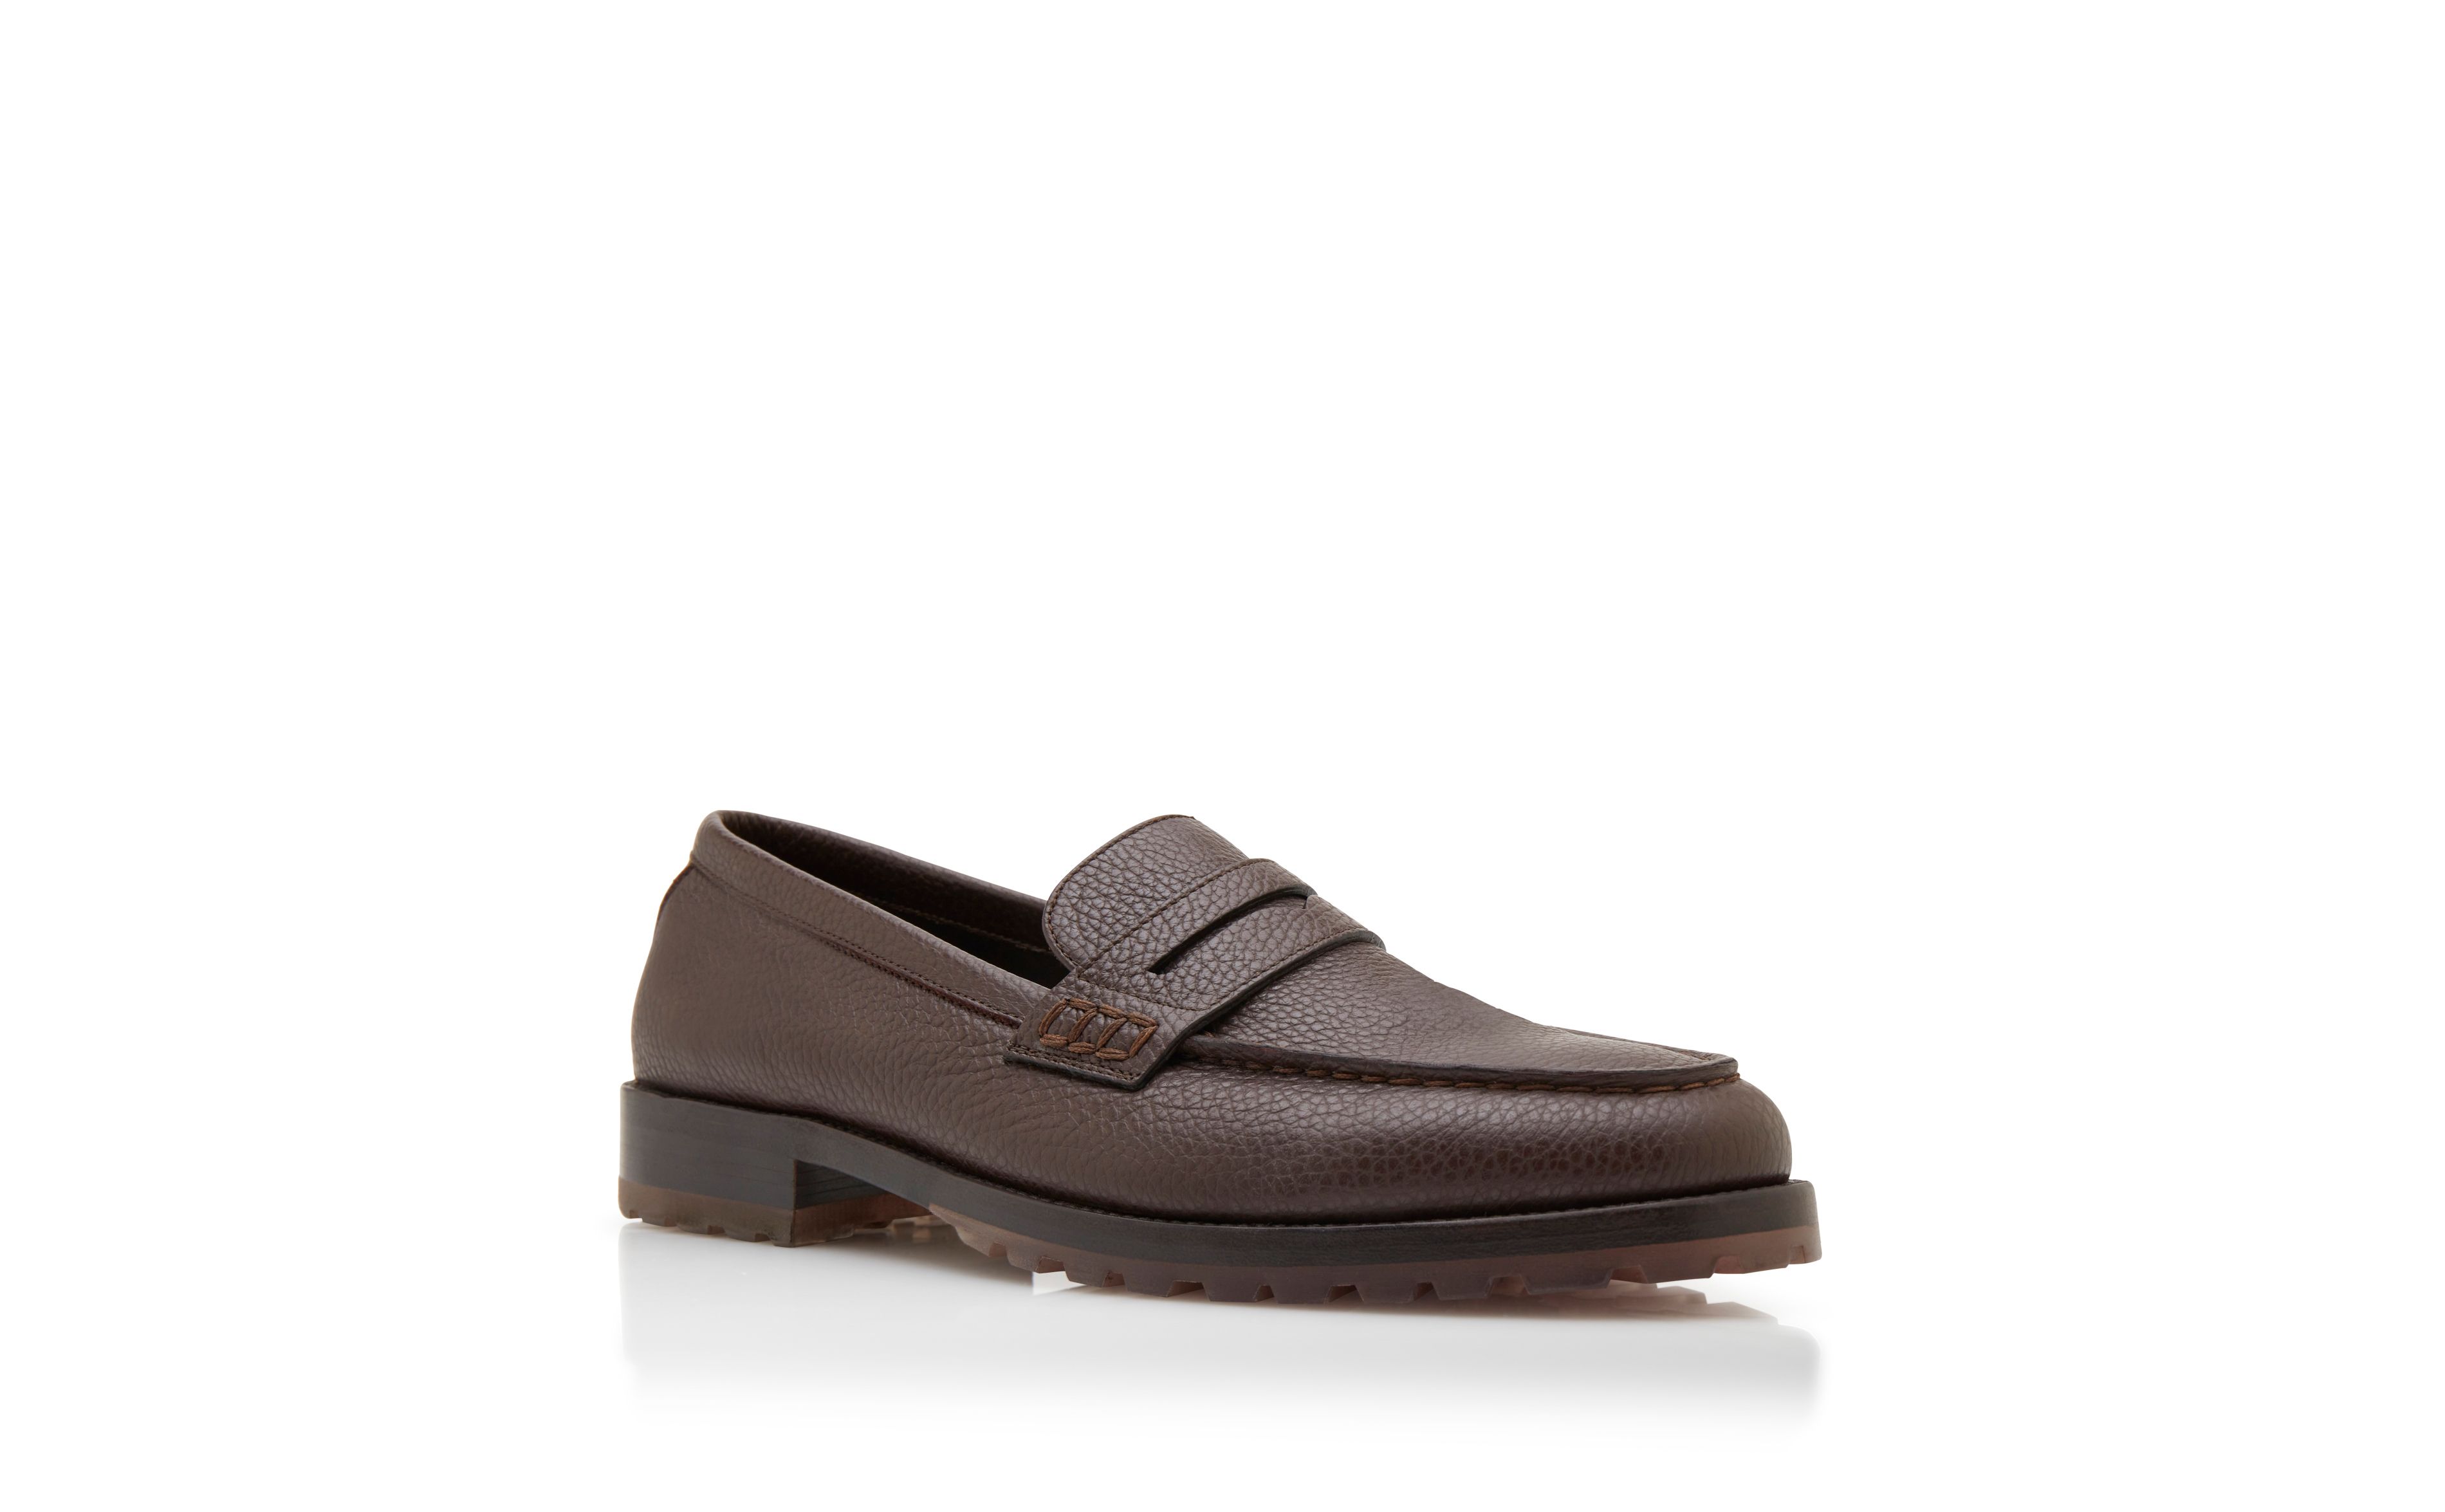 Designer Dark Brown Calf Leather Penny Loafers - Image Upsell